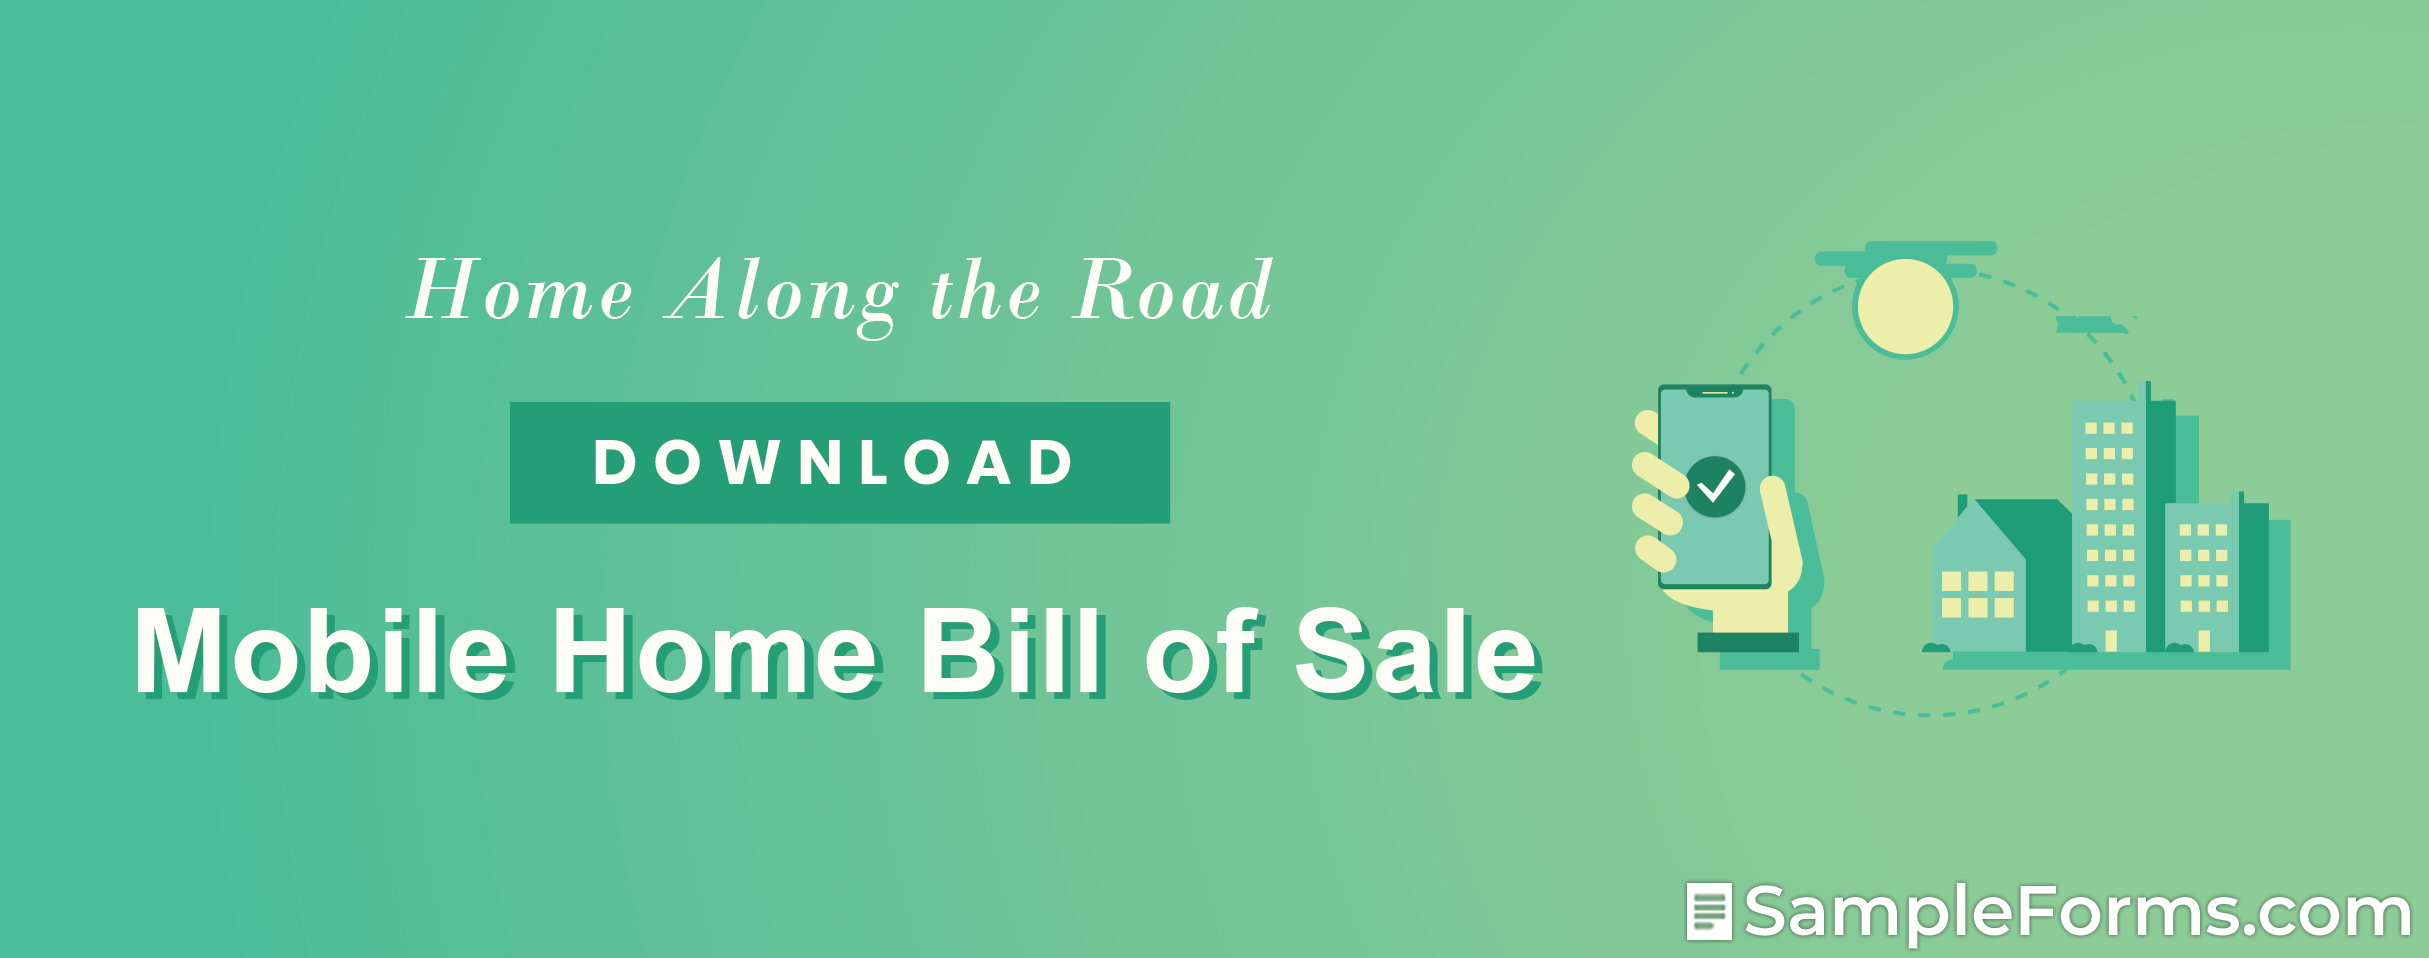 Mobile Home Bill of Sale Form3